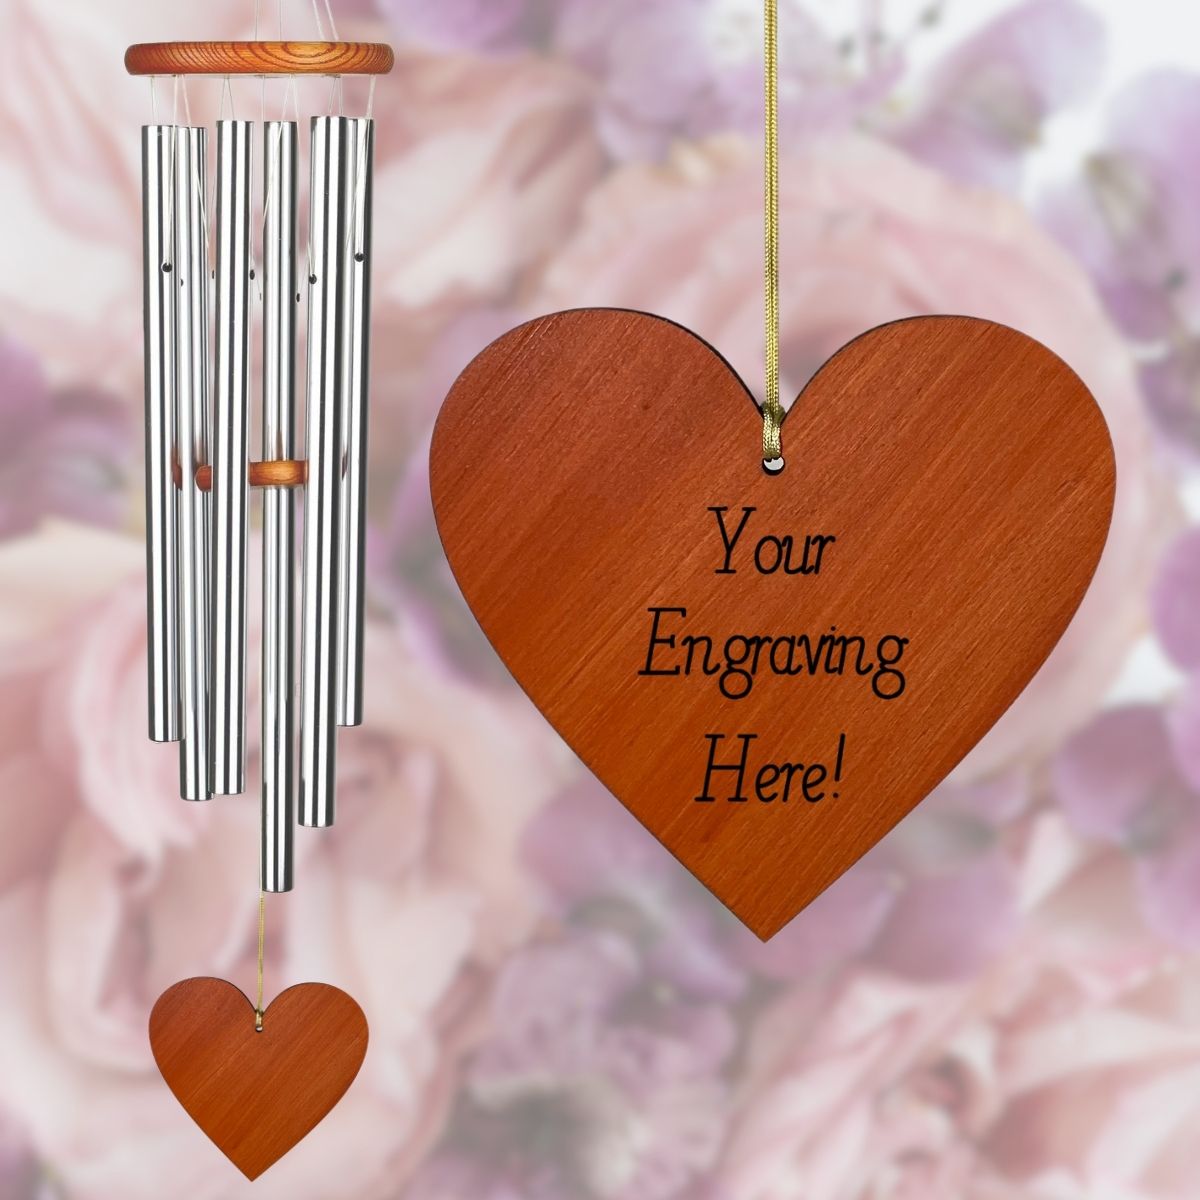 Amazing Grace 40 Inch Wind Chime - Engravable Heart Sail - Silver